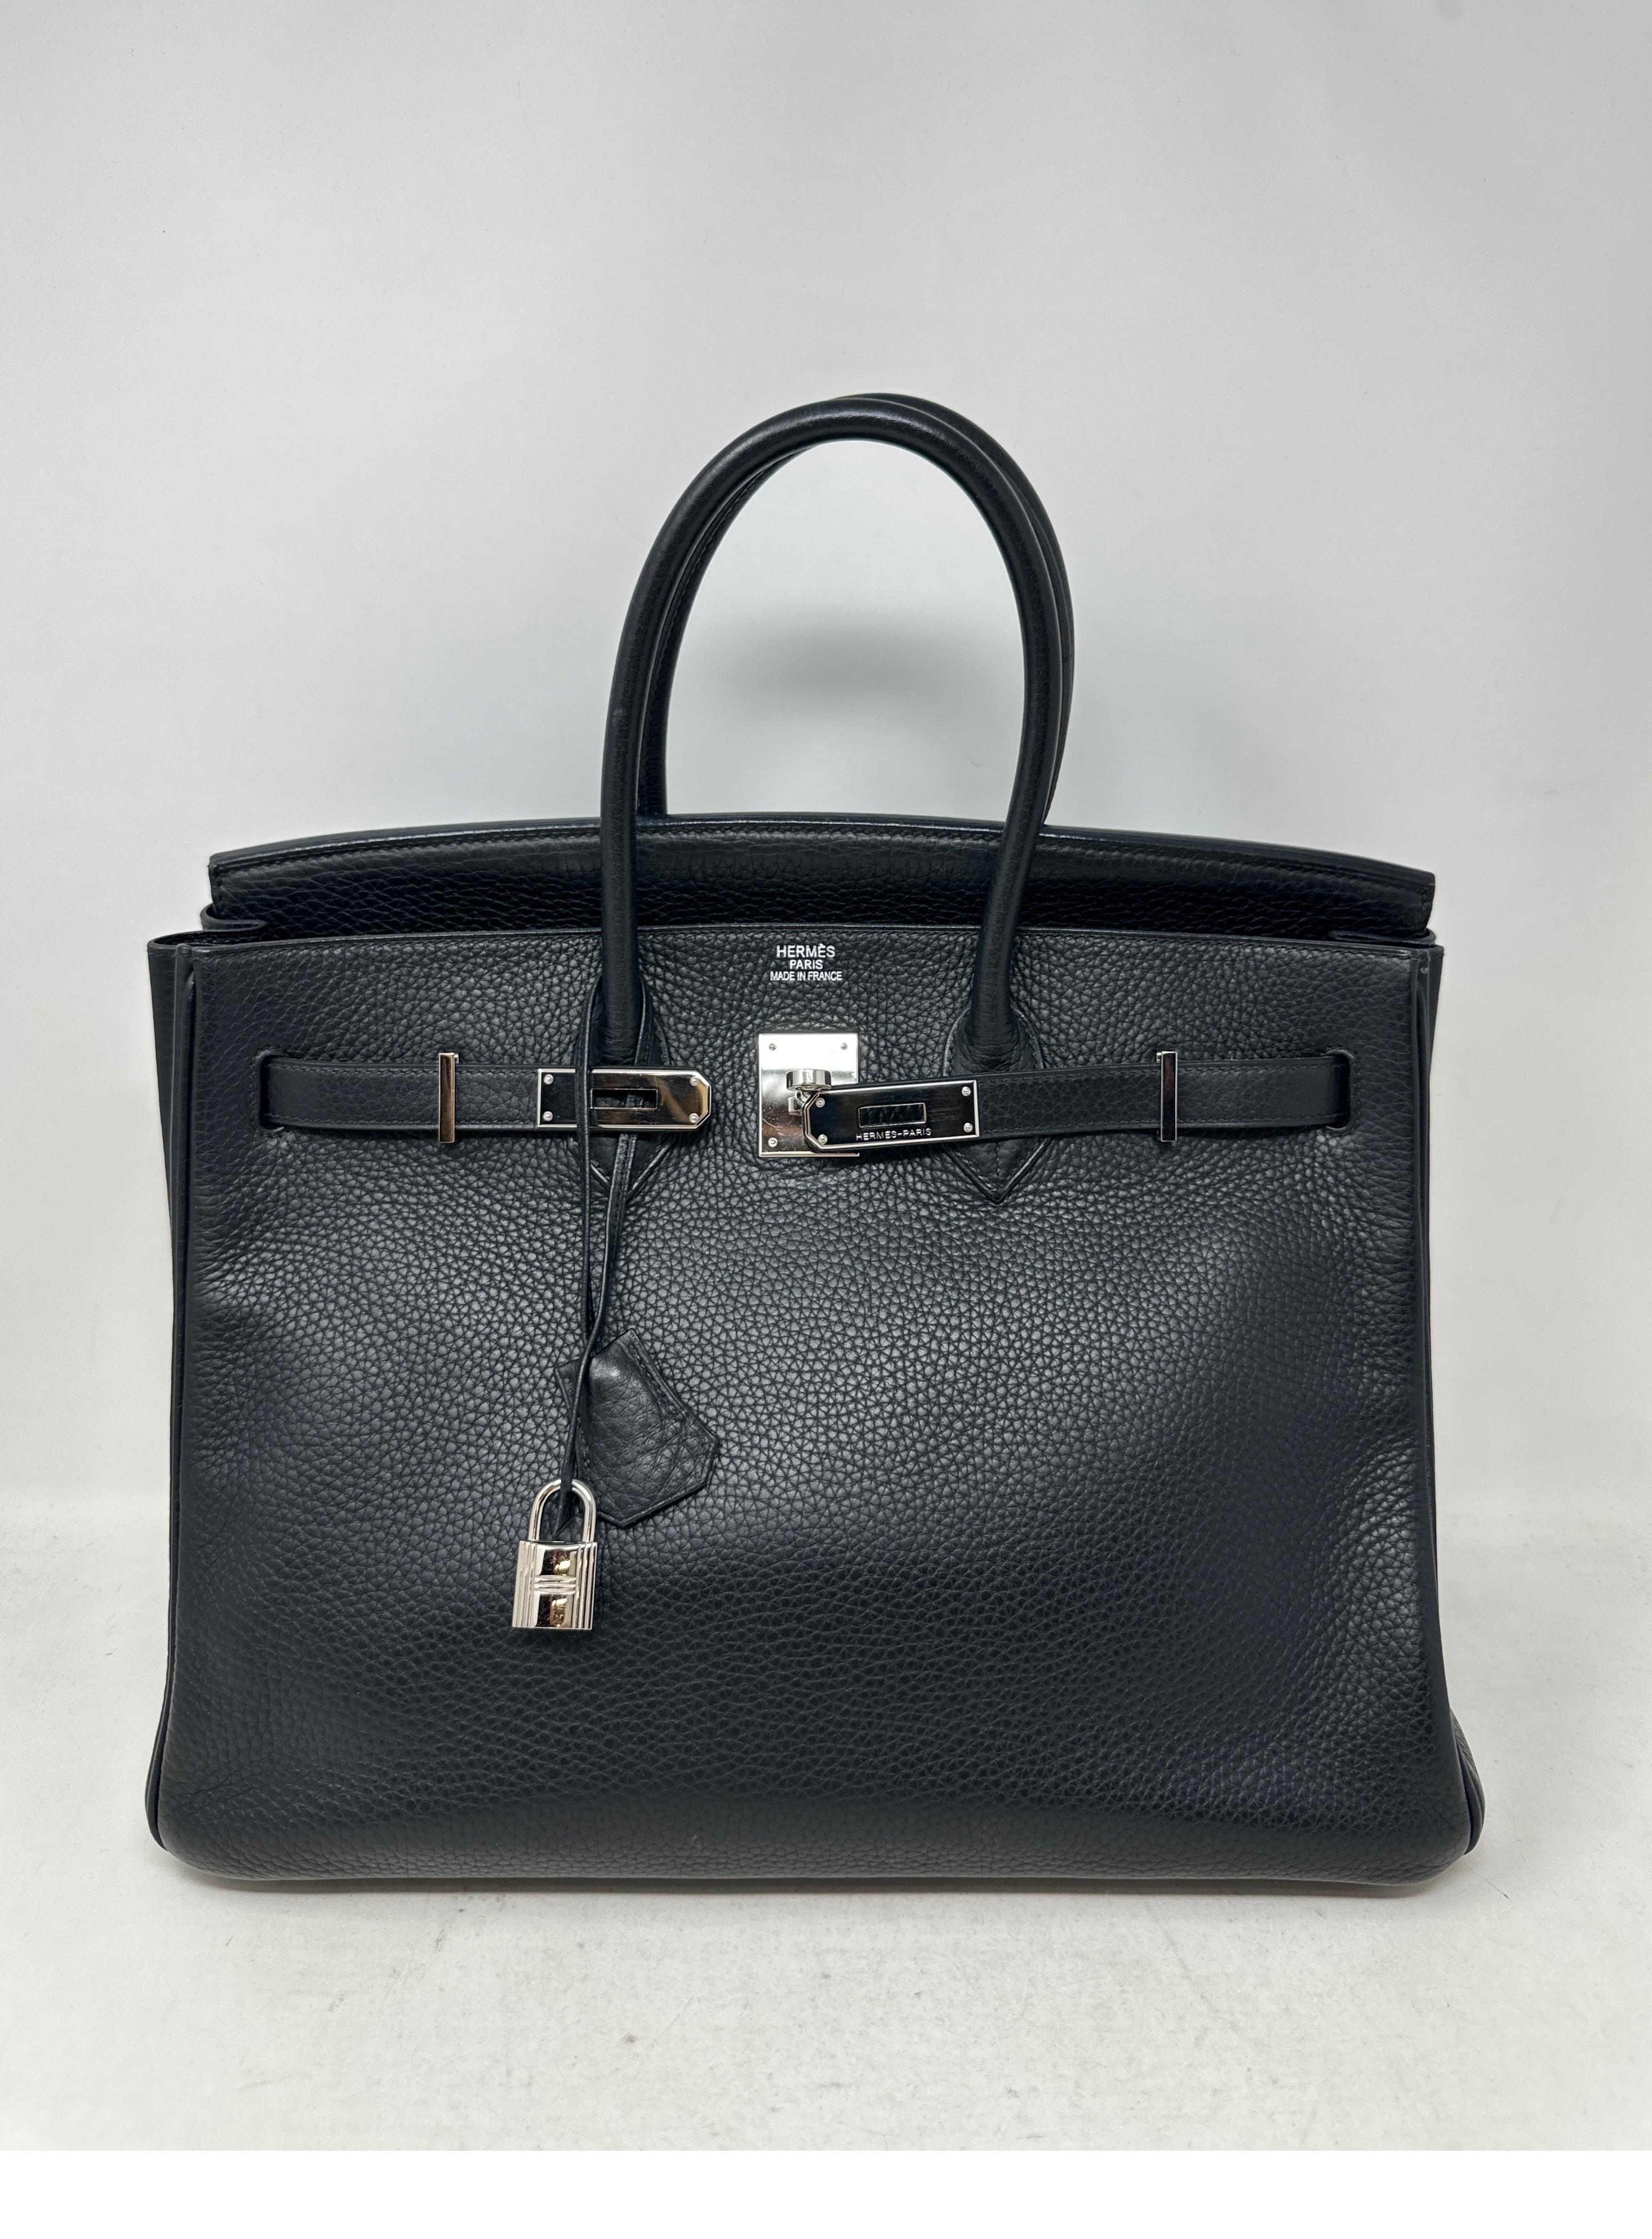 Hermes Black Birkin 35 Bag. Palladium silver hardware. Clemence leather. Excellent condition. Interior clean. Classic Birkin color and size. Great investment bag. Includes clochette, lock, keys, and dust bag. Guaranteed authentic. 